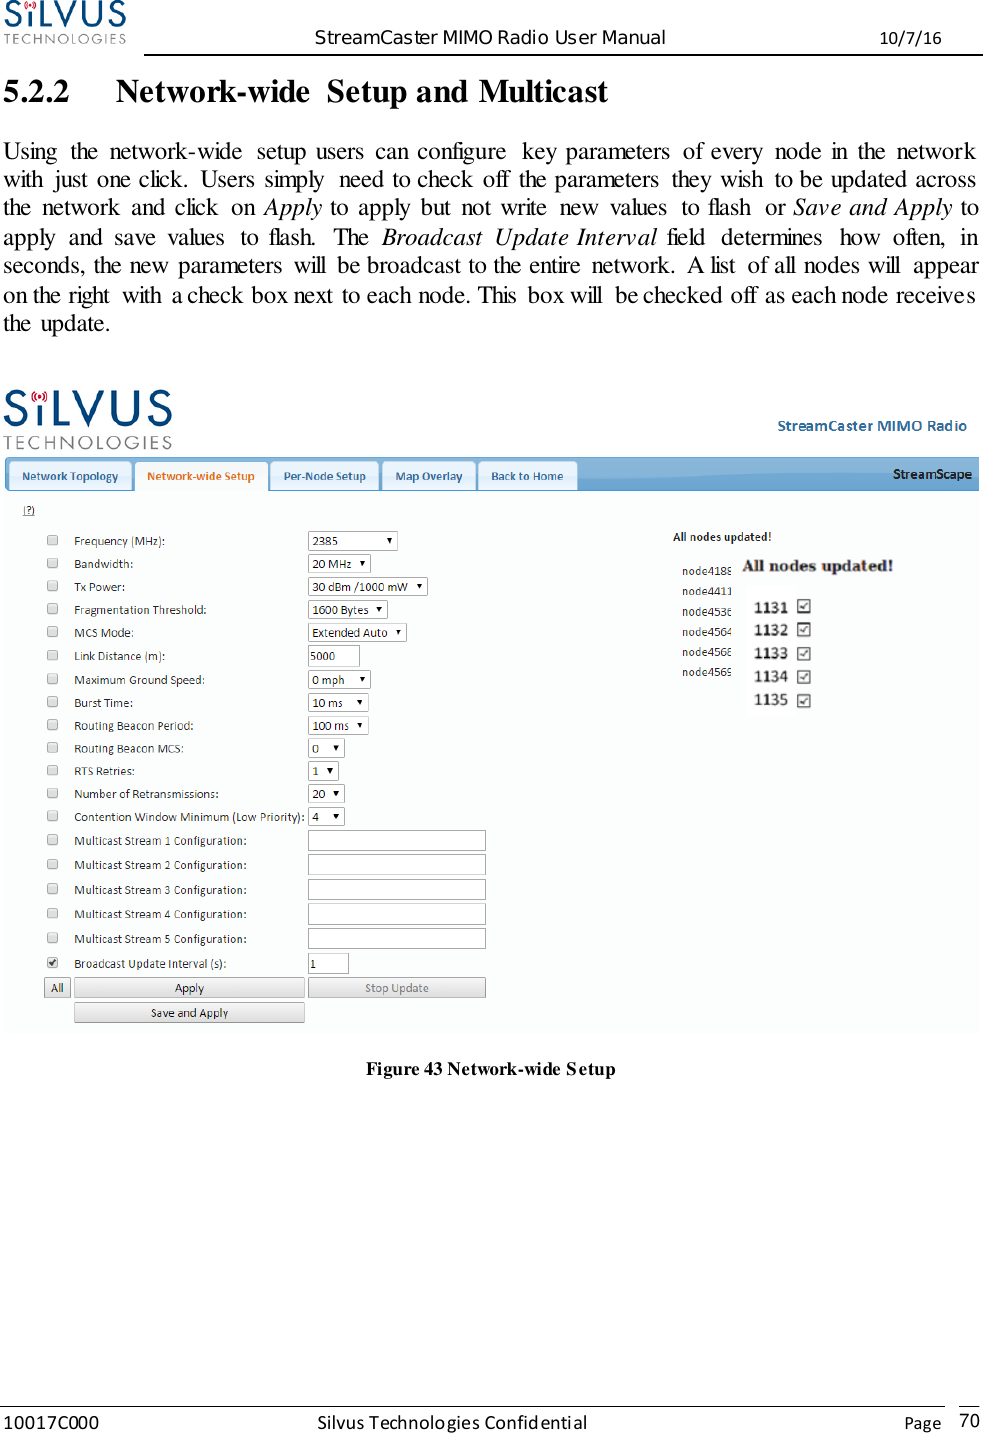  StreamCaster MIMO Radio User Manual  10/7/16 10017C000 Silvus Technologies Confidential    Page   70 5.2.2 Network-wide  Setup and Multicast Using  the  network-wide  setup users  can configure  key parameters  of every  node in  the  network with  just one click.  Users simply  need to check off  the parameters  they wish  to be updated across the  network  and click  on  Apply to apply  but  not write  new  values  to flash  or Save and Apply to apply  and  save  values  to flash.  The  Broadcast  Update Interval  field  determines  how  often,  in seconds, the new parameters  will  be broadcast to the entire  network.  A list  of all nodes will  appear on the right  with  a check box next to each node. This  box will  be checked off as each node receives the update.   Figure 43 Network-wide Setup     